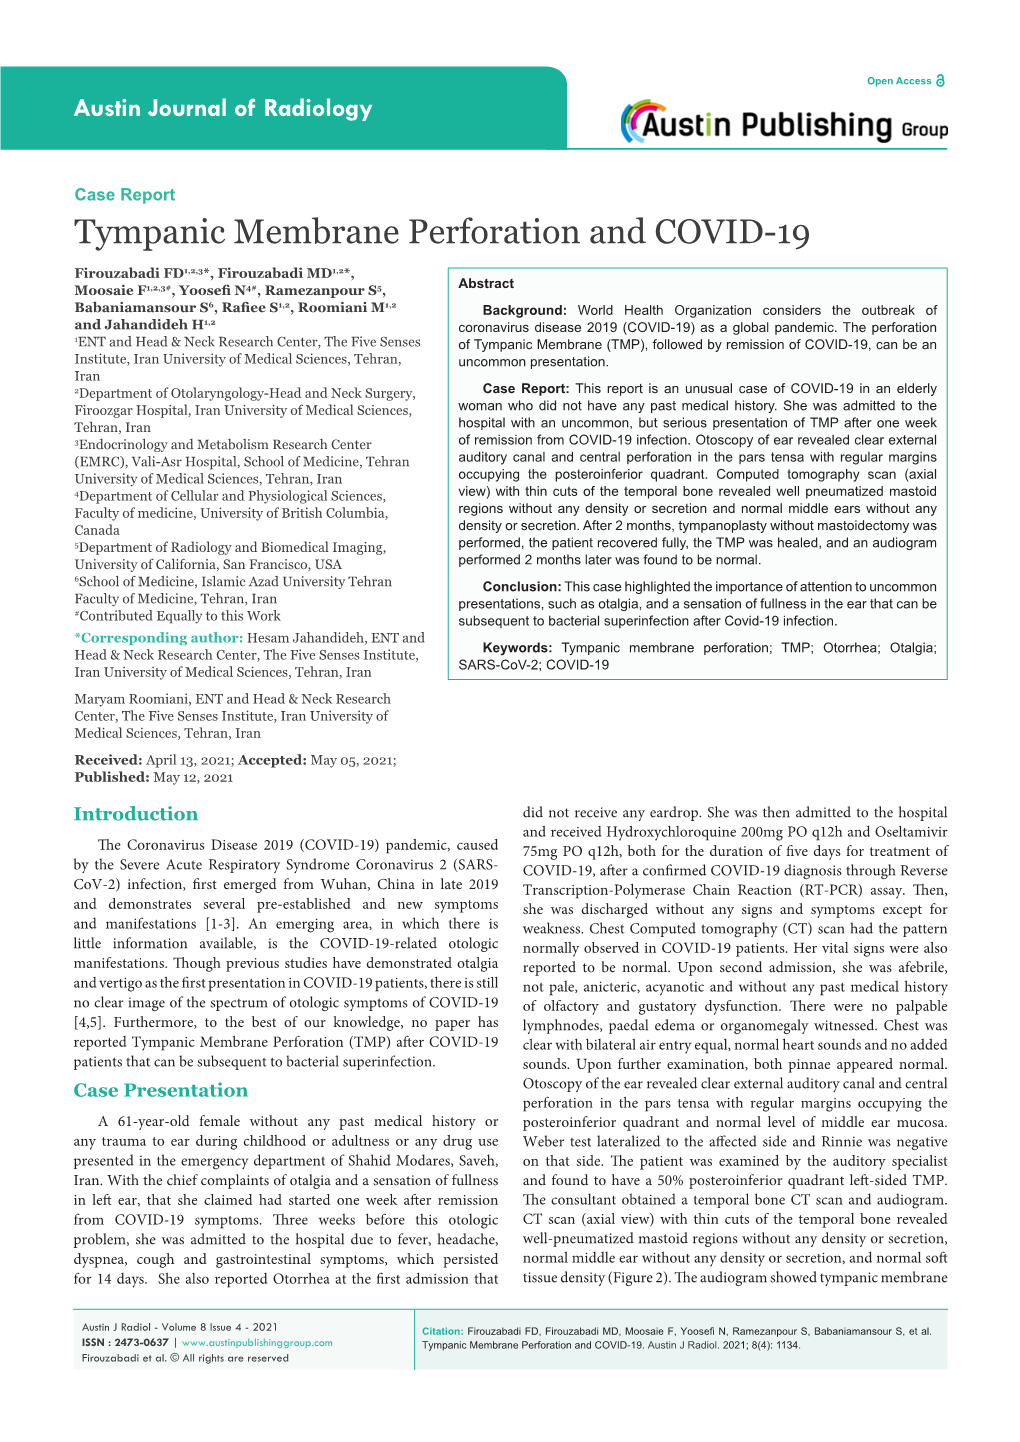 Tympanic Membrane Perforation and COVID-19